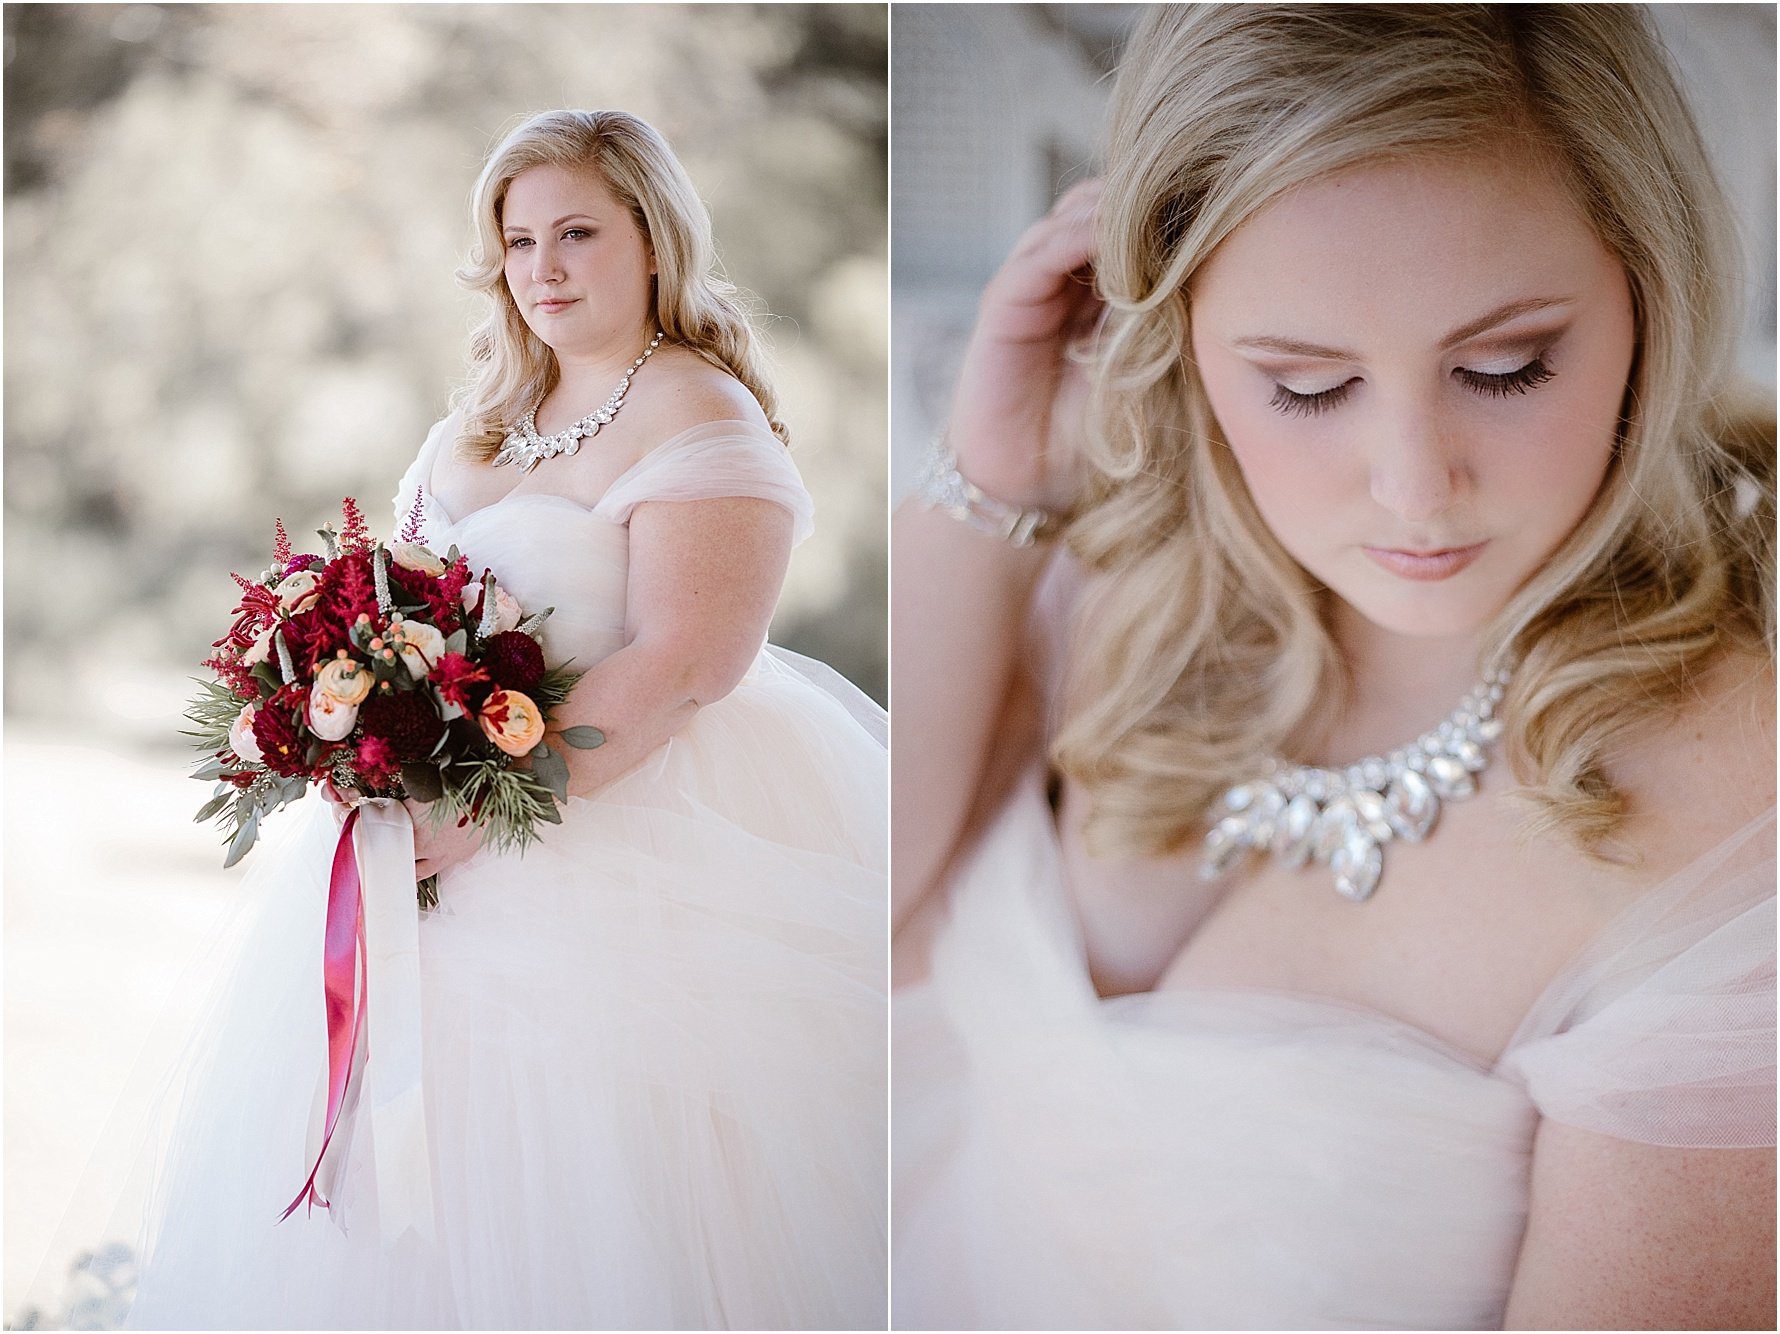 Bridal Portraits in Knoxville | Erin Morrison Photography www.erinmorrisonphotography.com